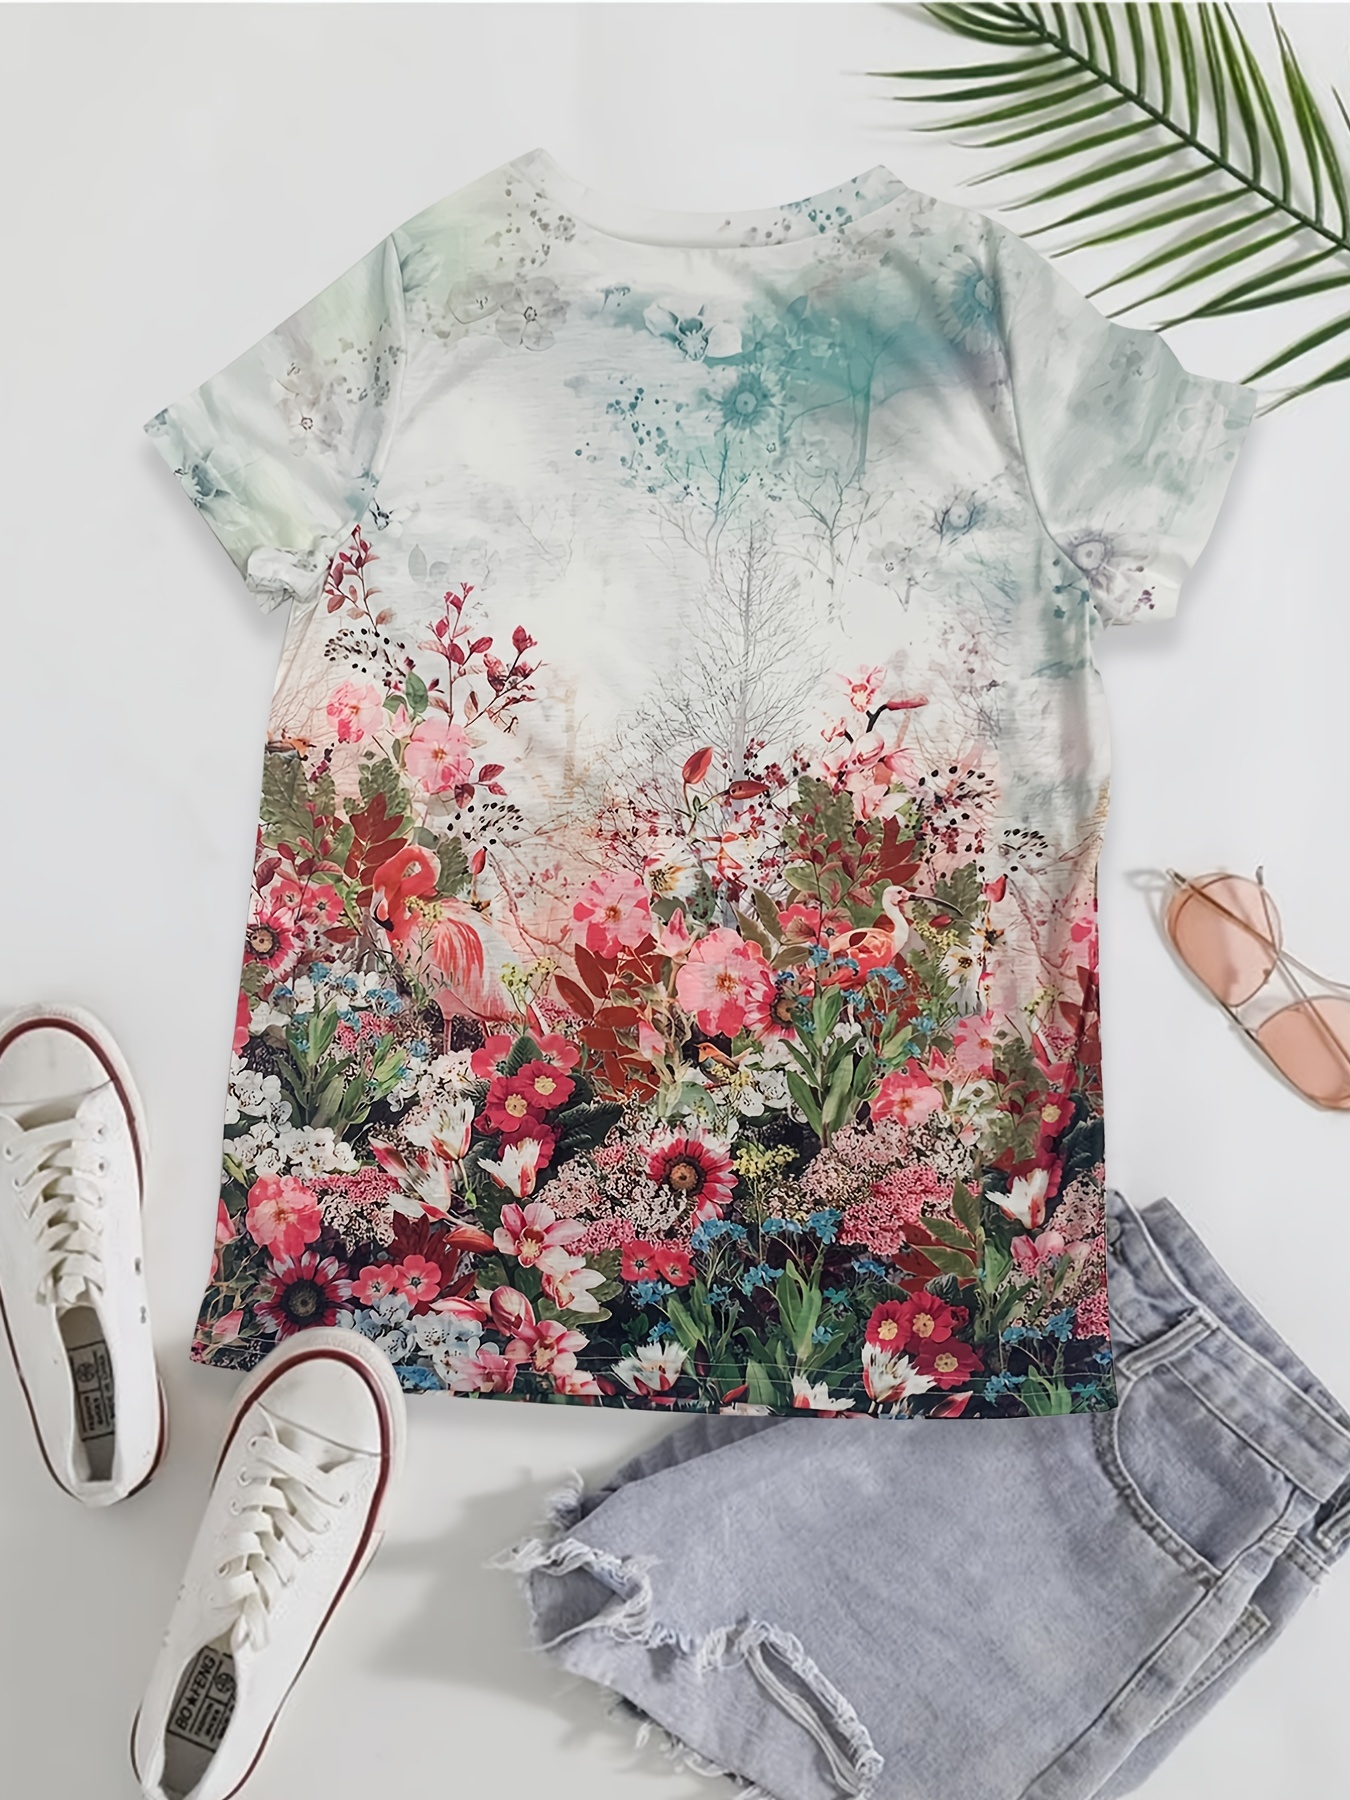 Summer Crew Neck Short Sleeve Tops Womens Casual Chic Floral Print